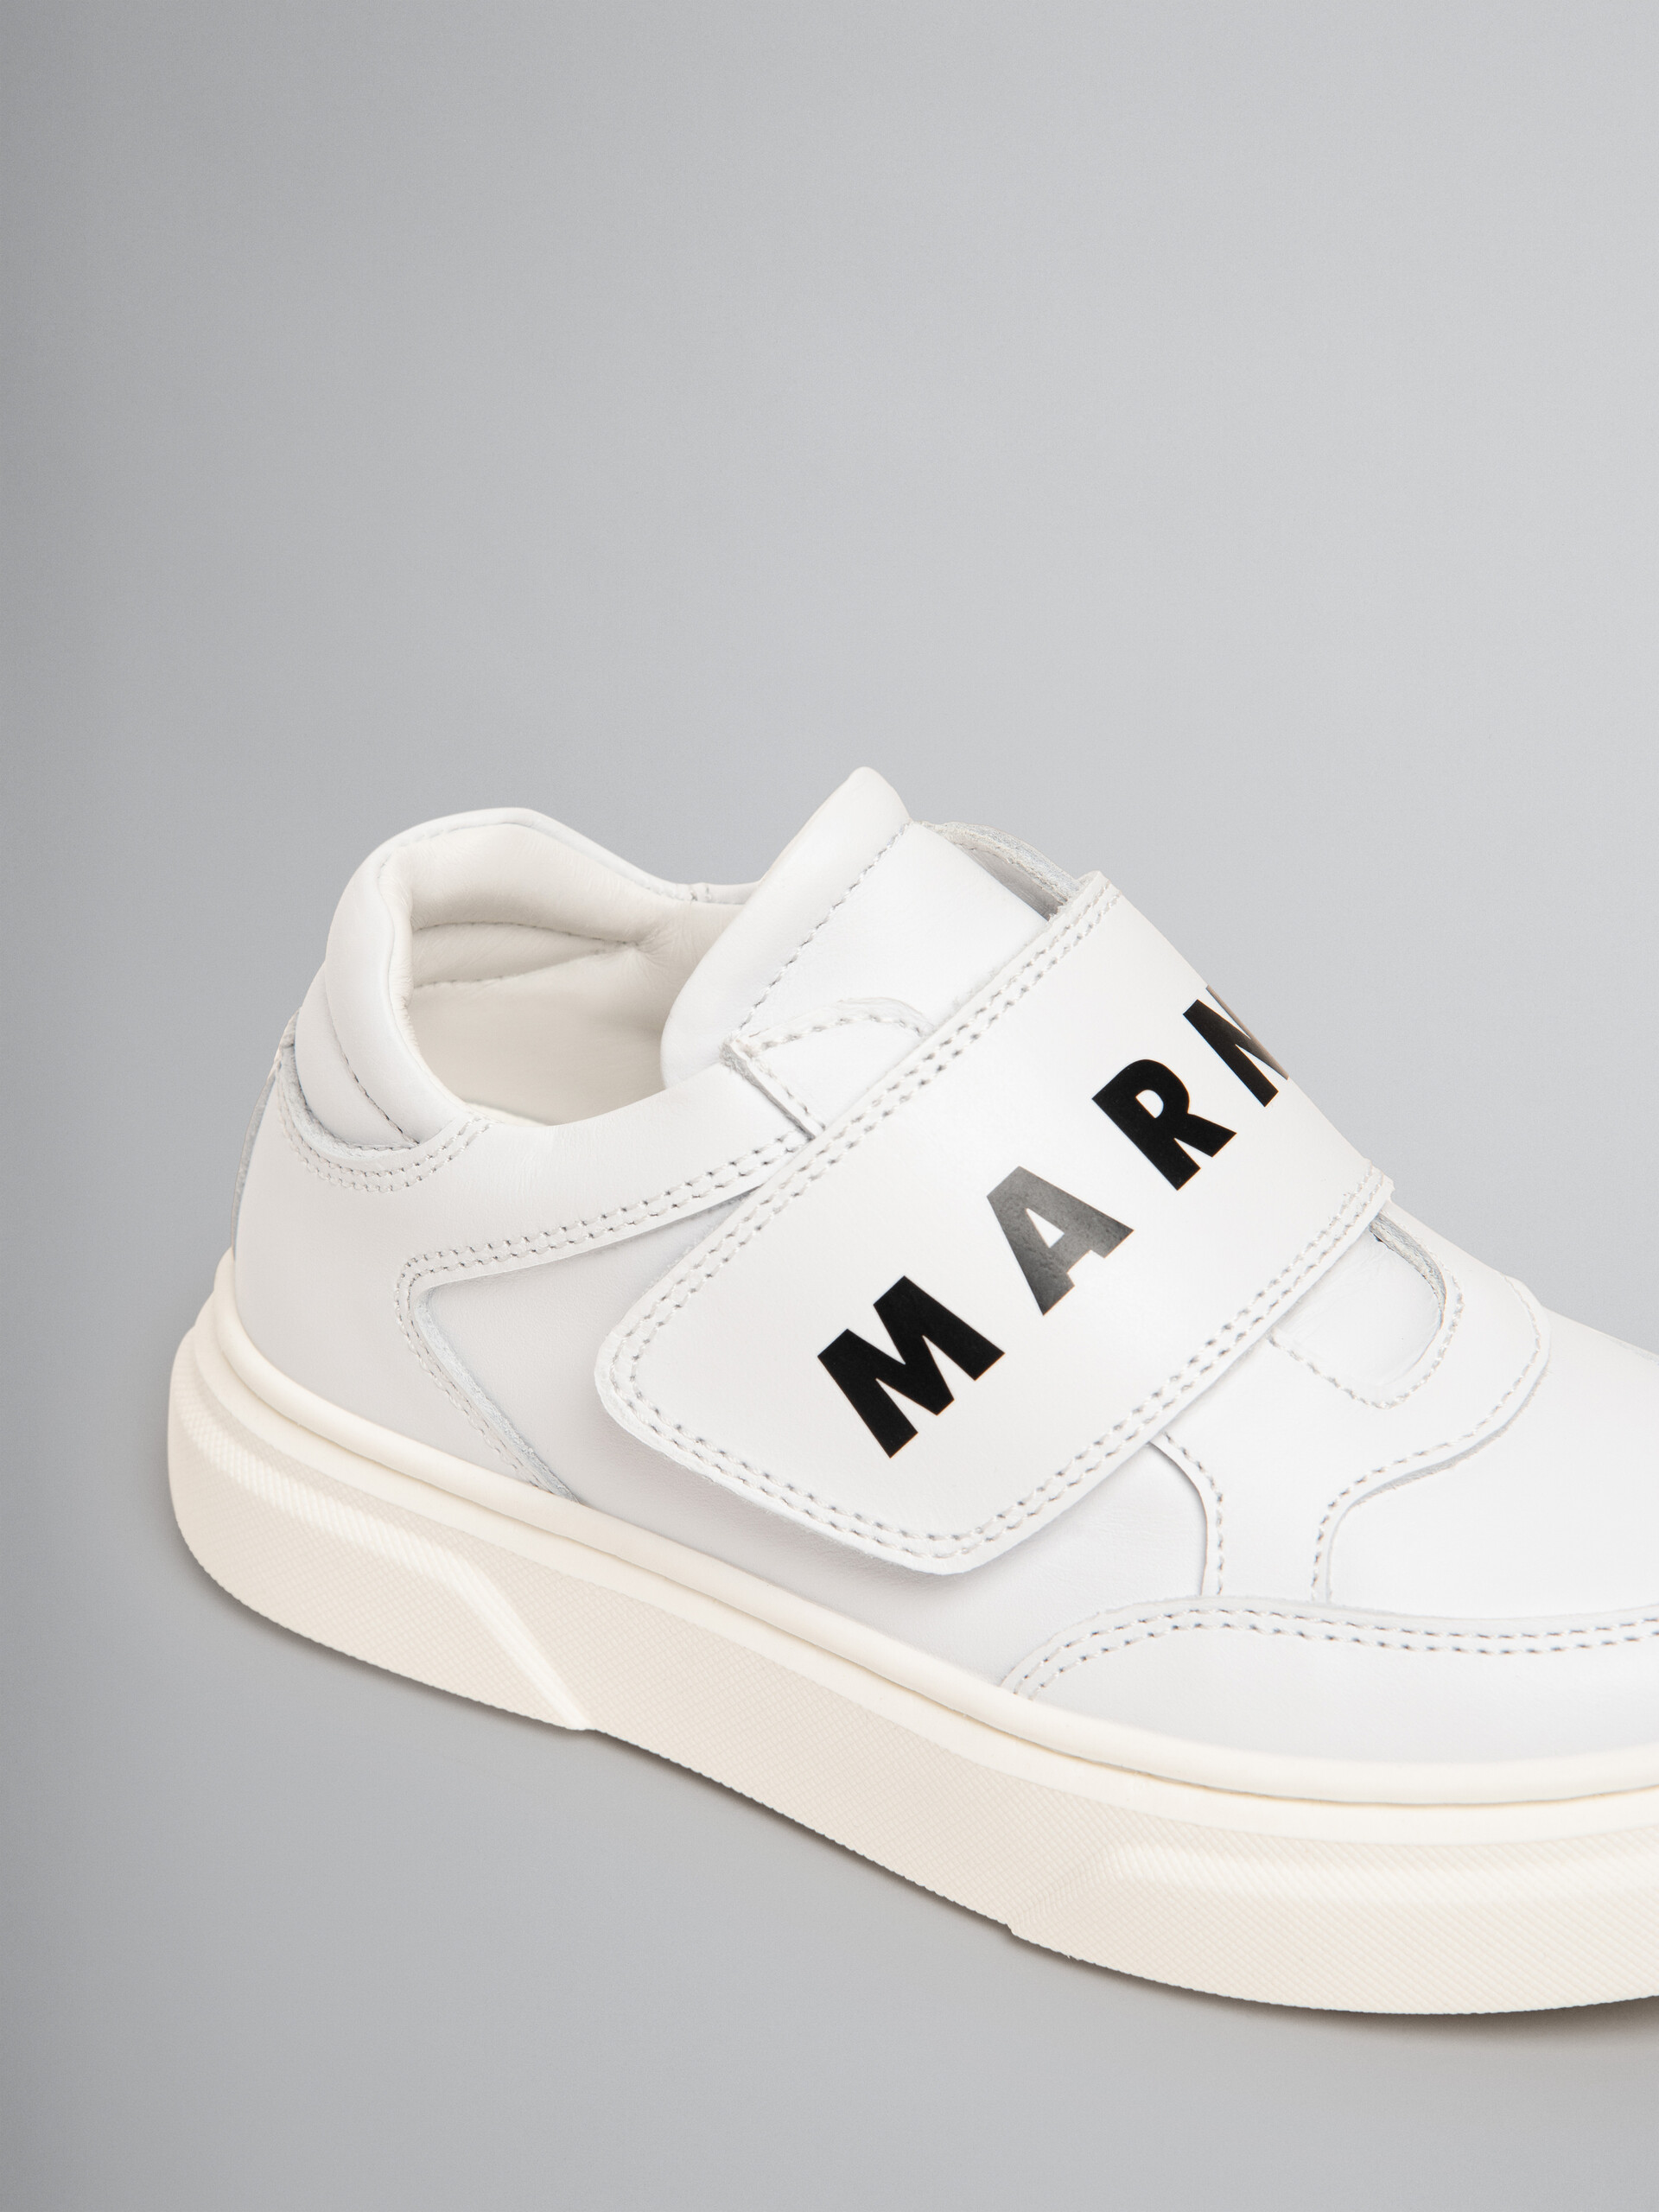 White leather sneaker with maxi strap - Other accessories - Image 4